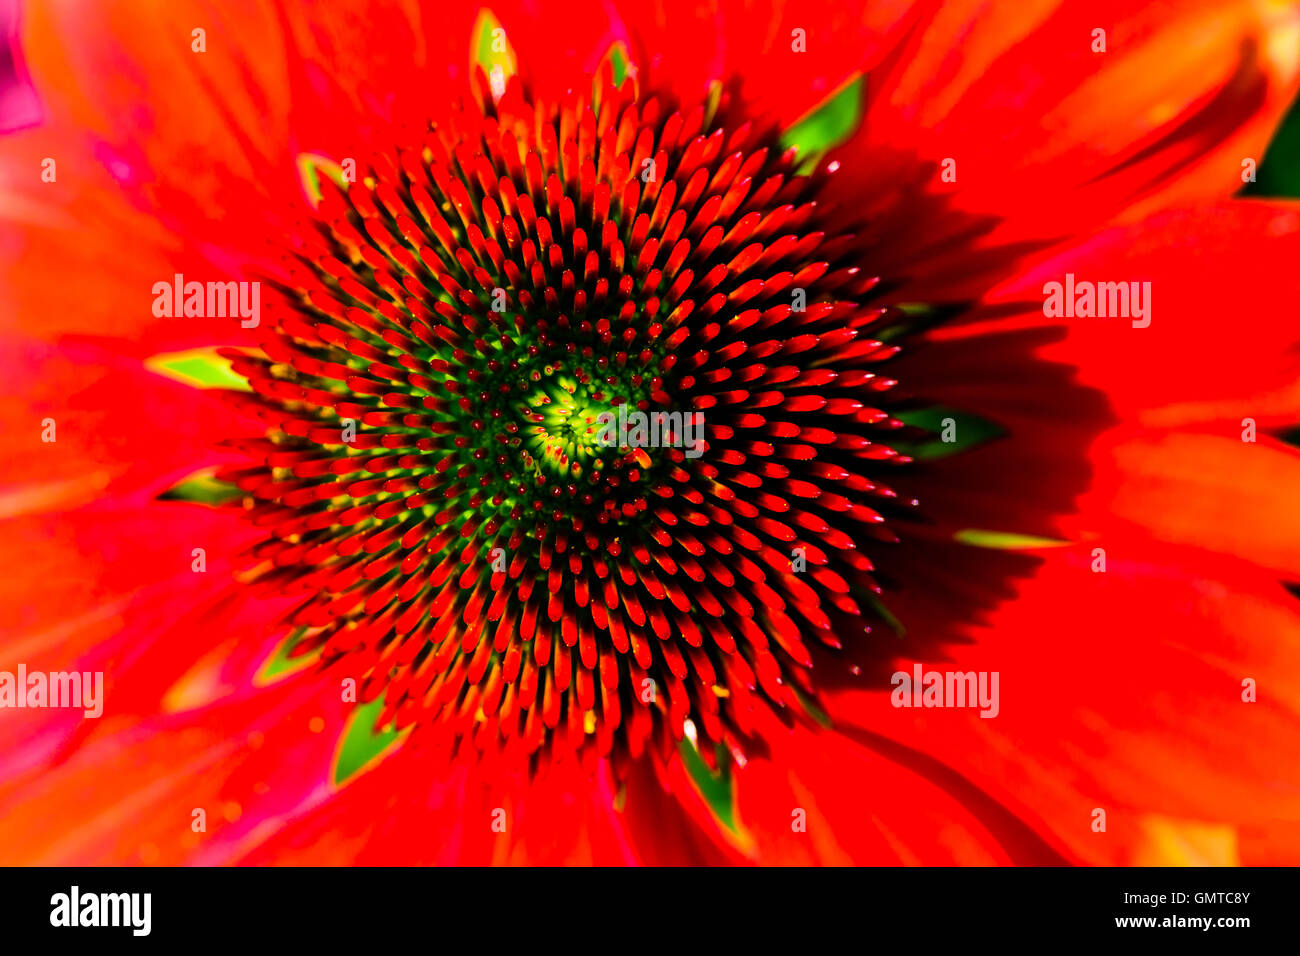 Abstract macro of flower head on red coneflower seen from above. Stock Photo